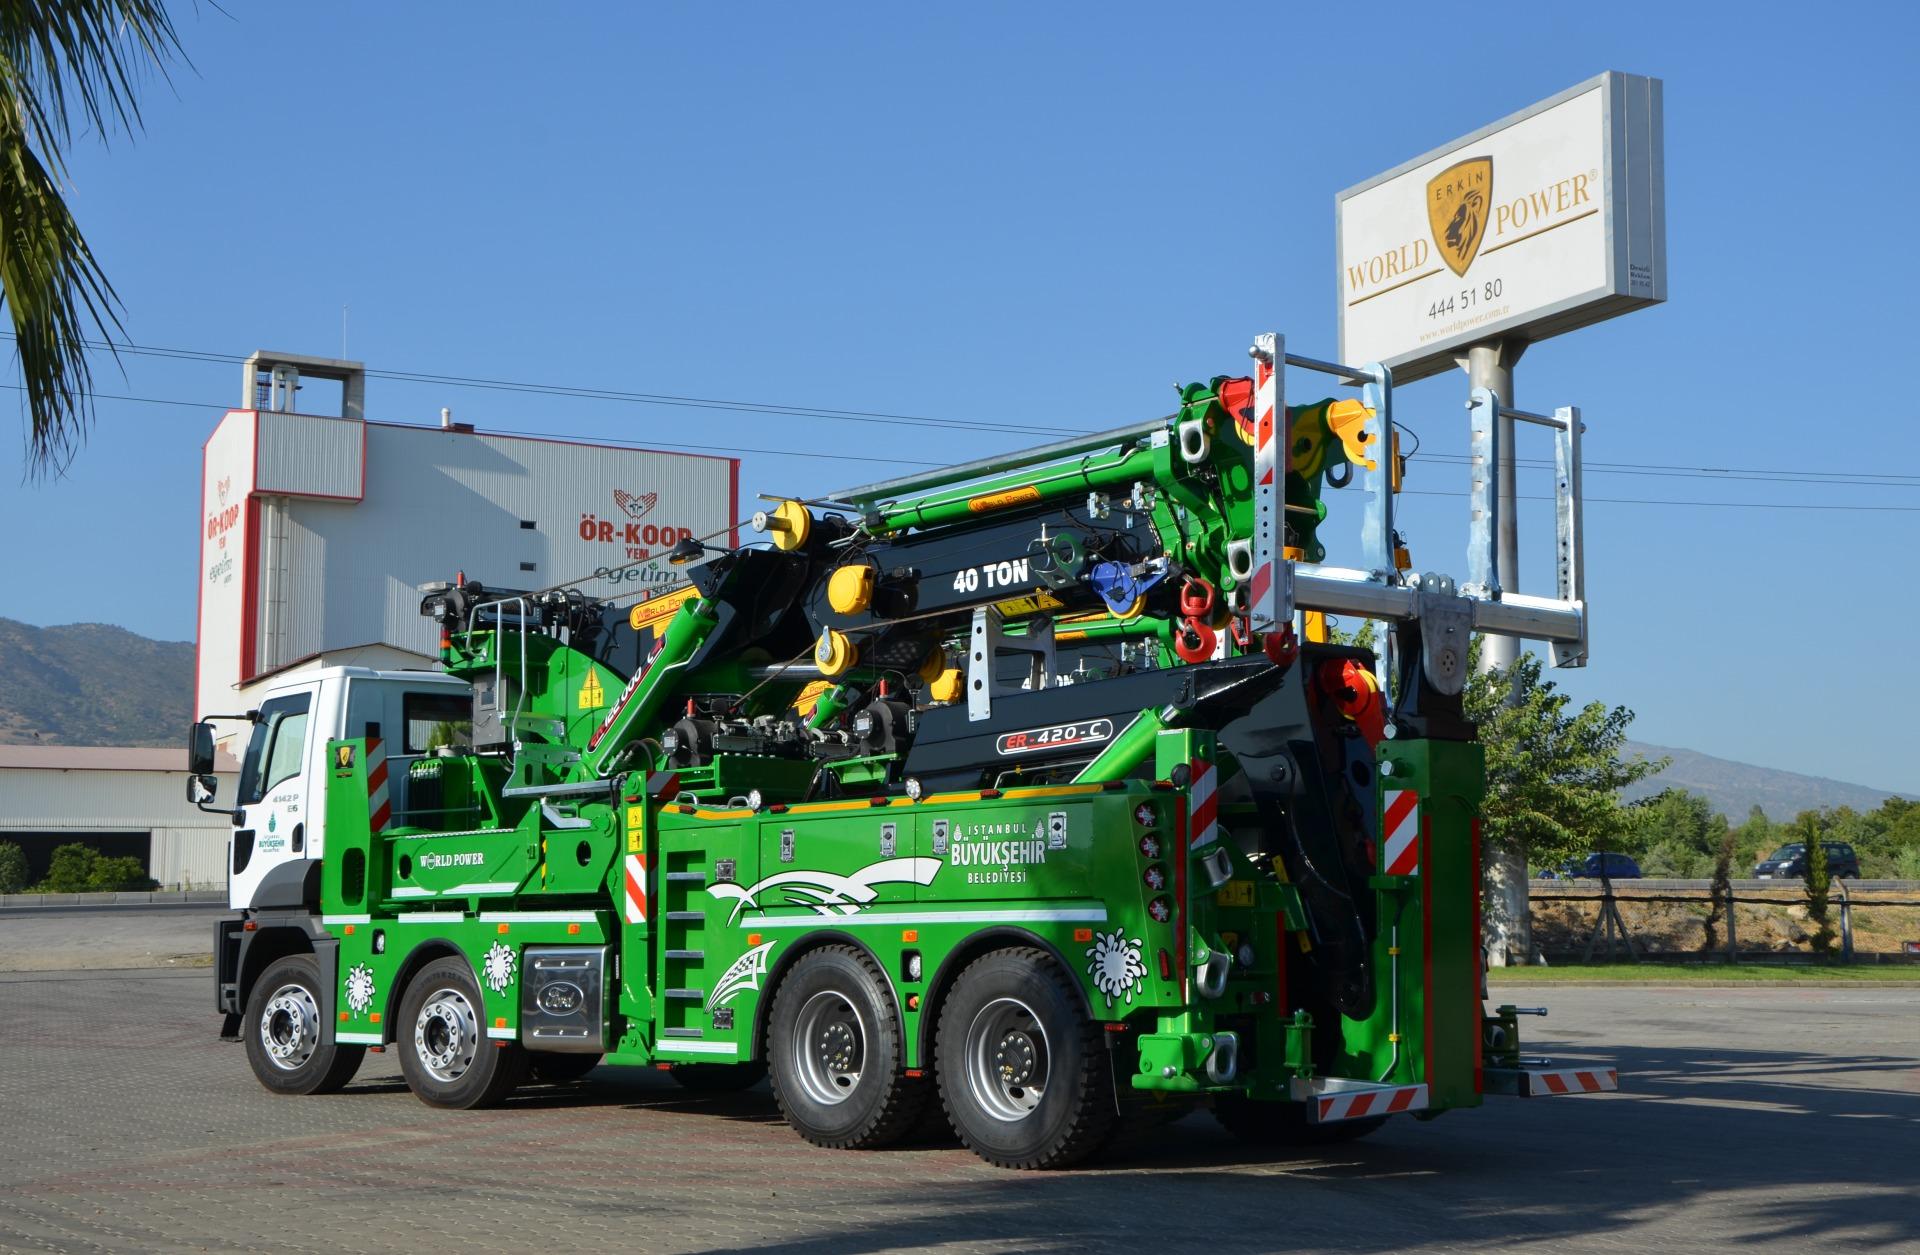 Recovery – Tow Trucks